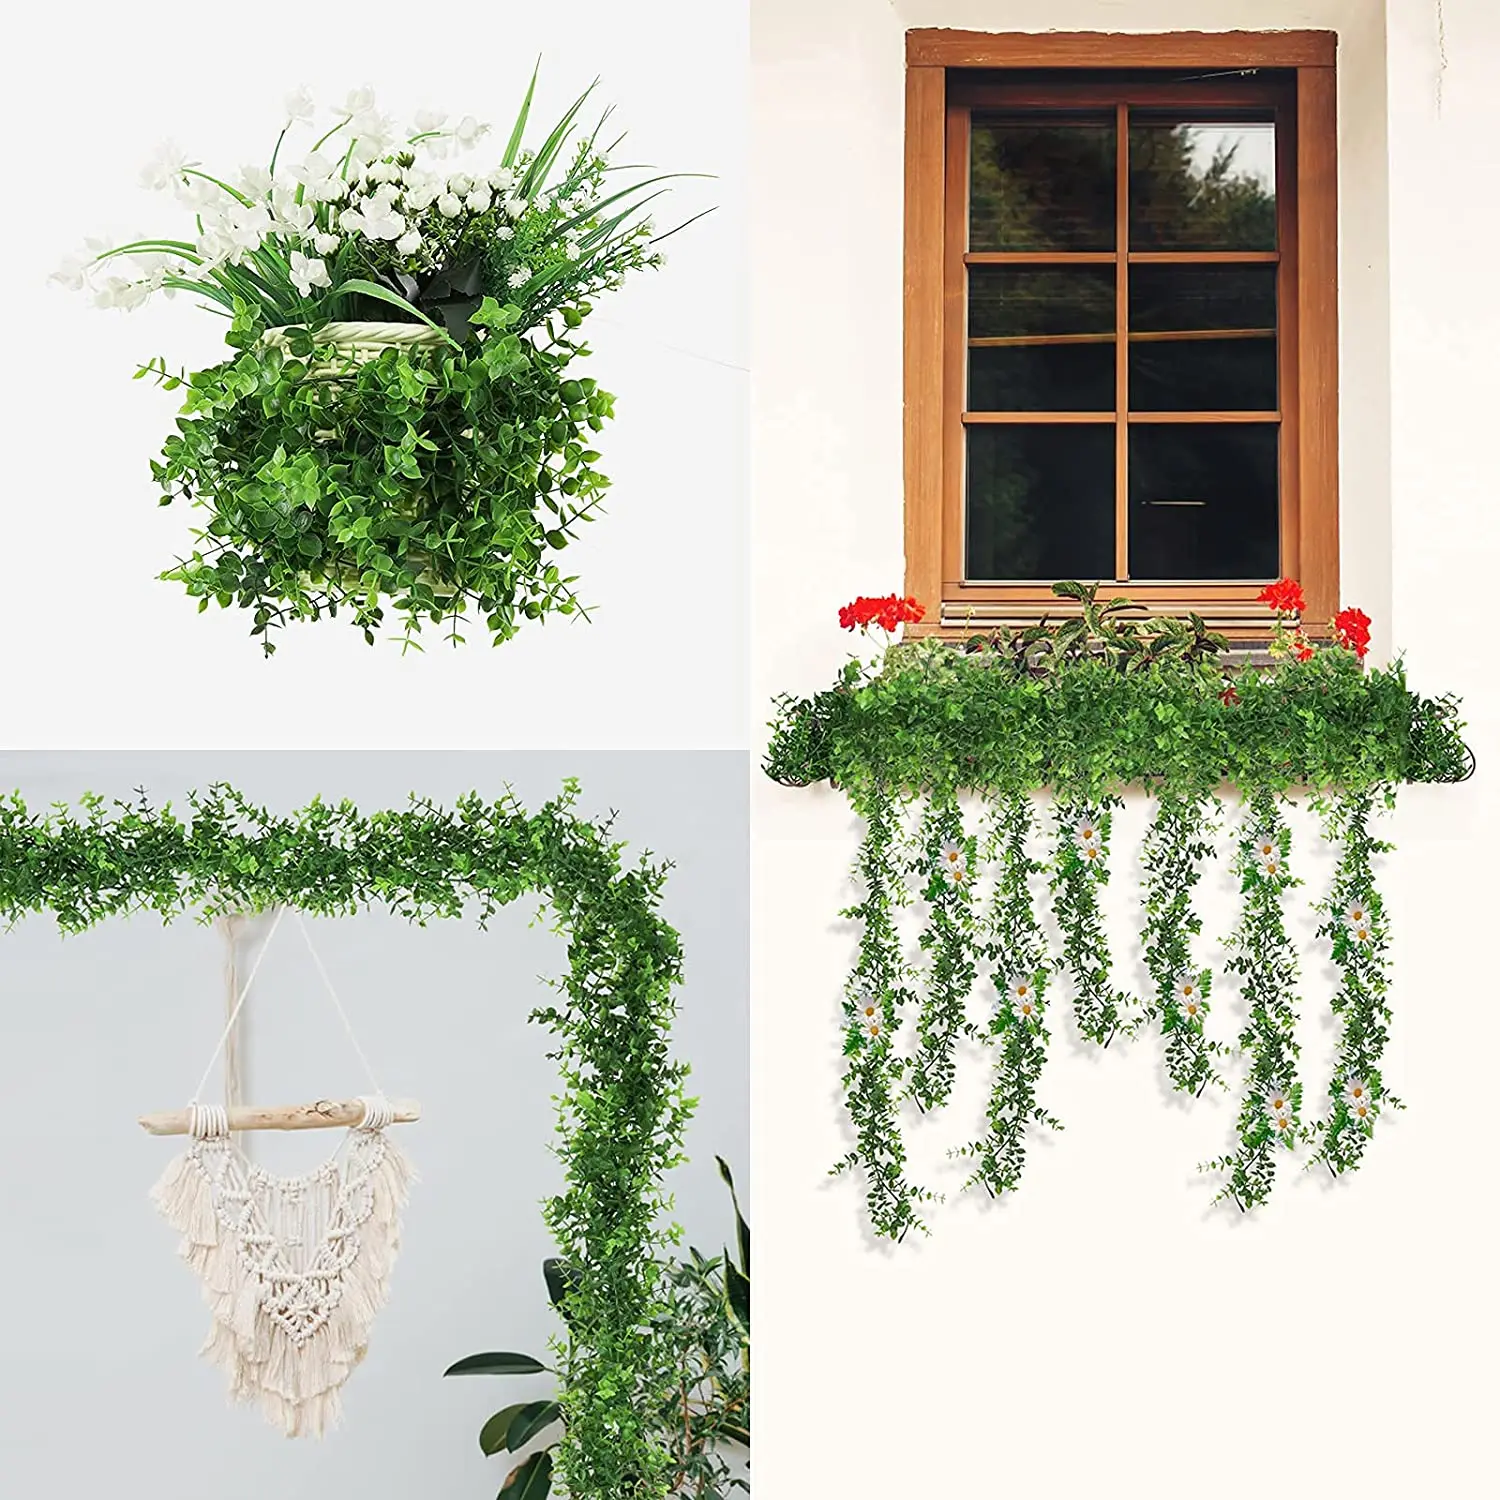 

Hanhan 2 Pack Artificial Garlands, Fake Hanging Eucalyptus Leaves Vines Greenery Garland Plant for Wedding Backdrop Arch